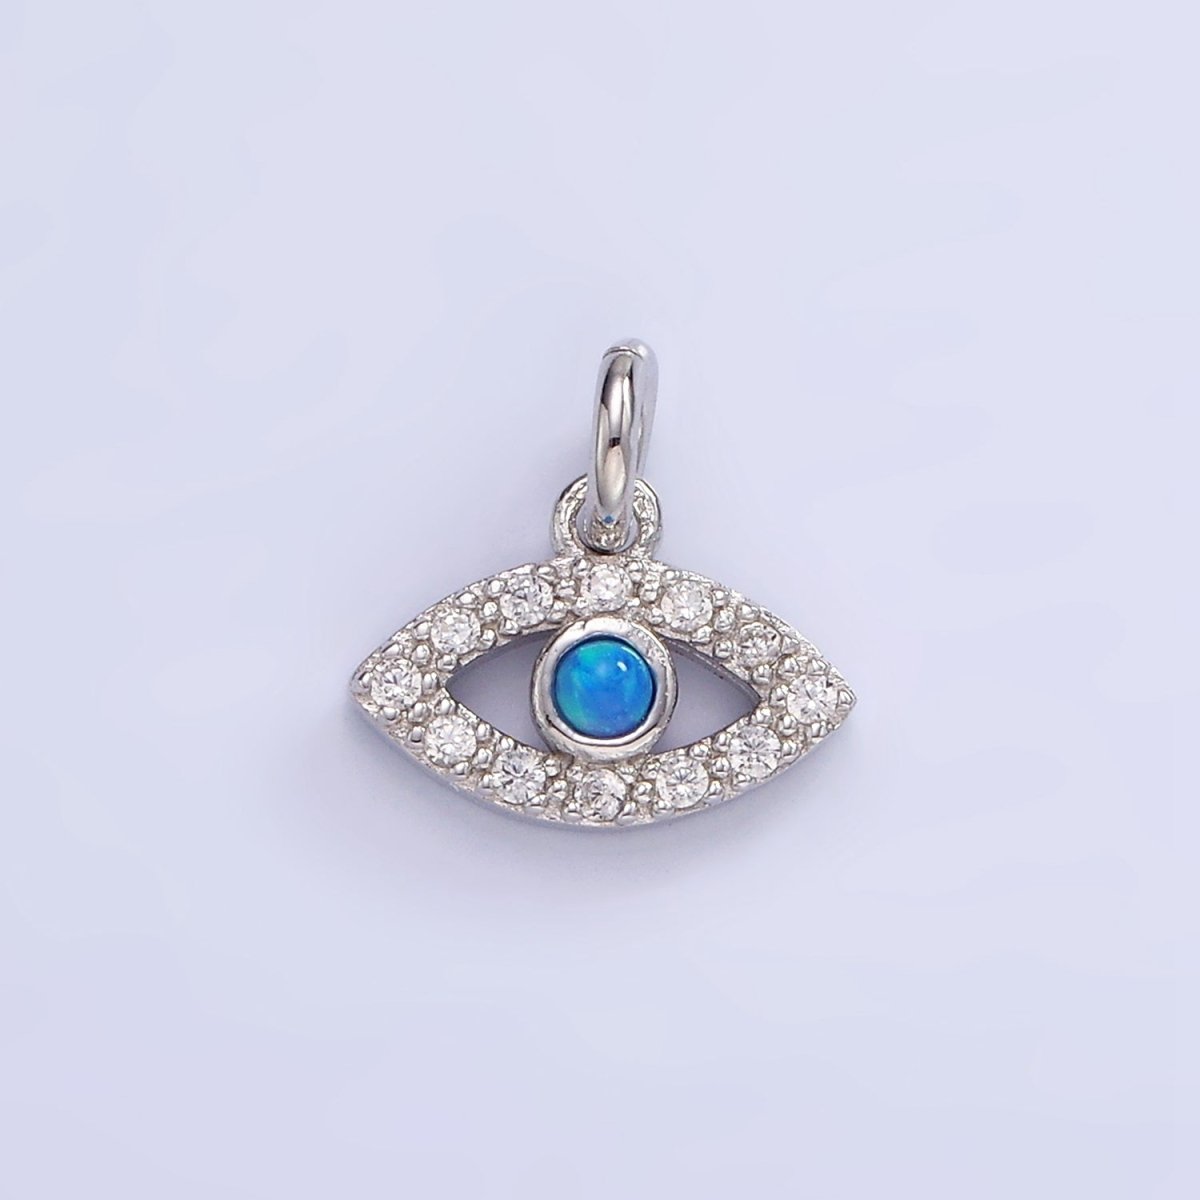 Mini S925 Sterling Silver Evil Eye Charm with Clear Opal Stone | SL-476 - DLUXCA